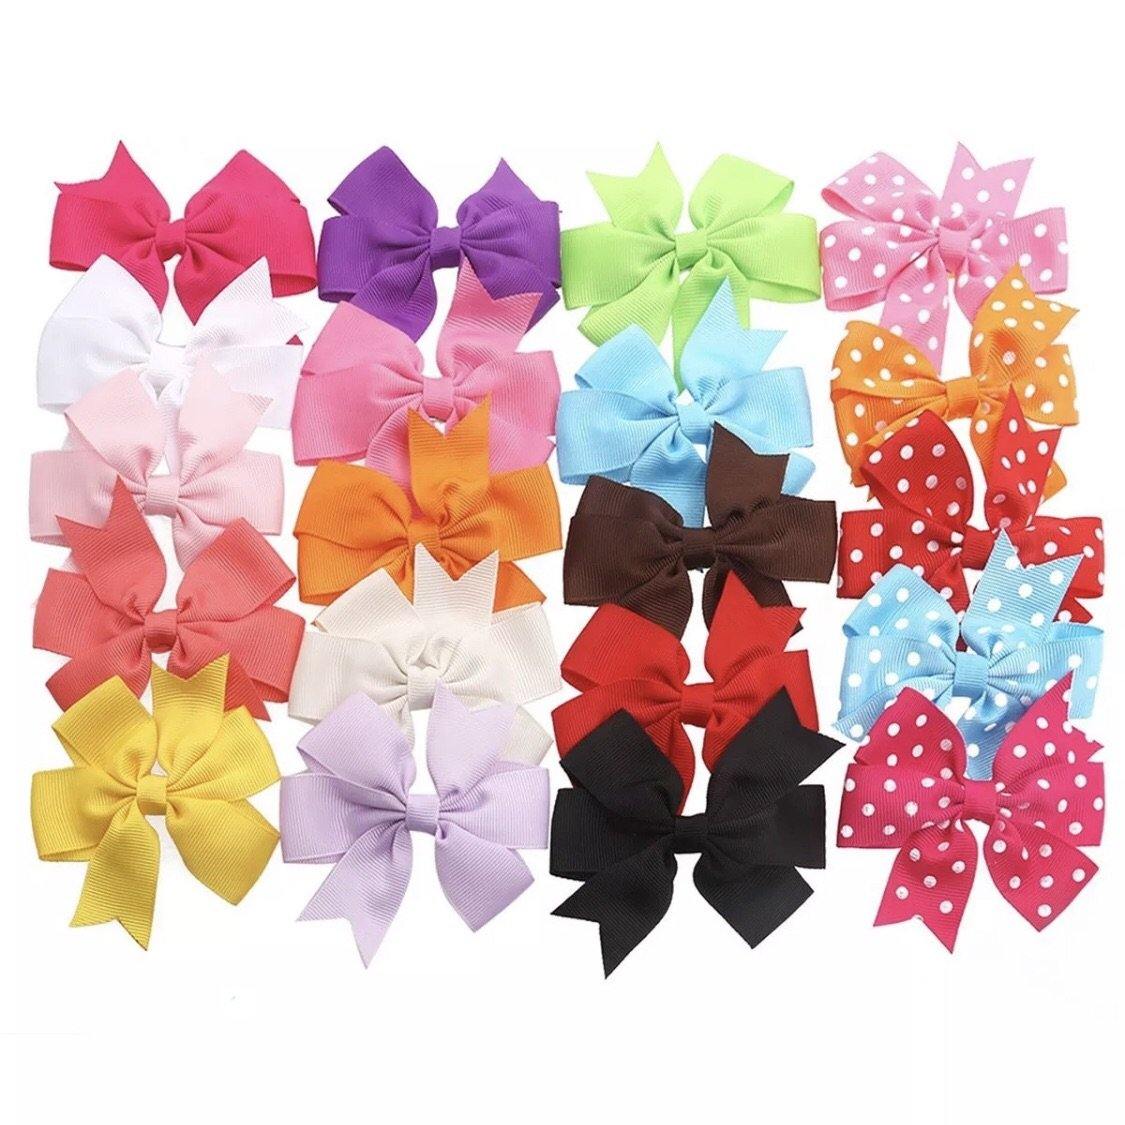 Grosgrain Ribbon Bow | Oscar & Me | Baby & Children’s Clothing & Accessories